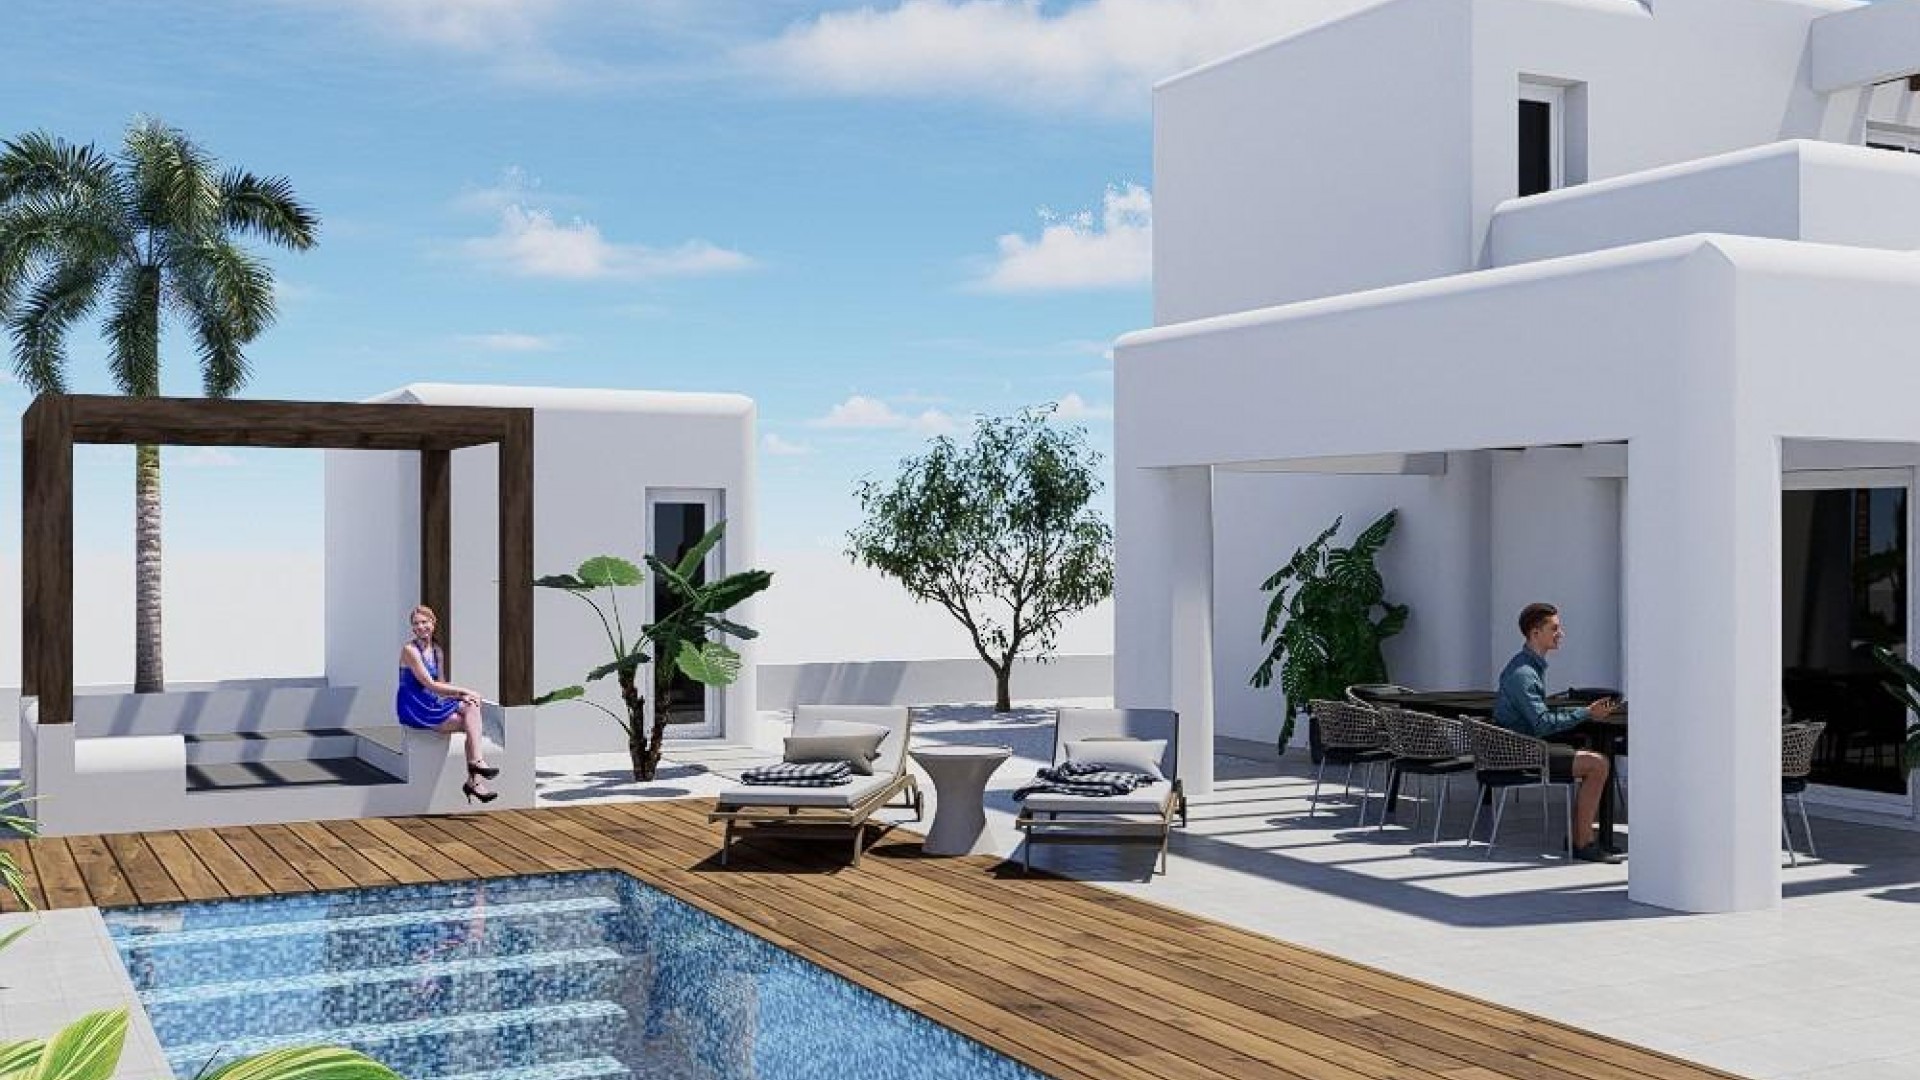 New exclusive villa in Polop in Ibiza style, amazing mountain and sea views, one floor with 2 bedrooms and 1 bathroom, pool, large solarium